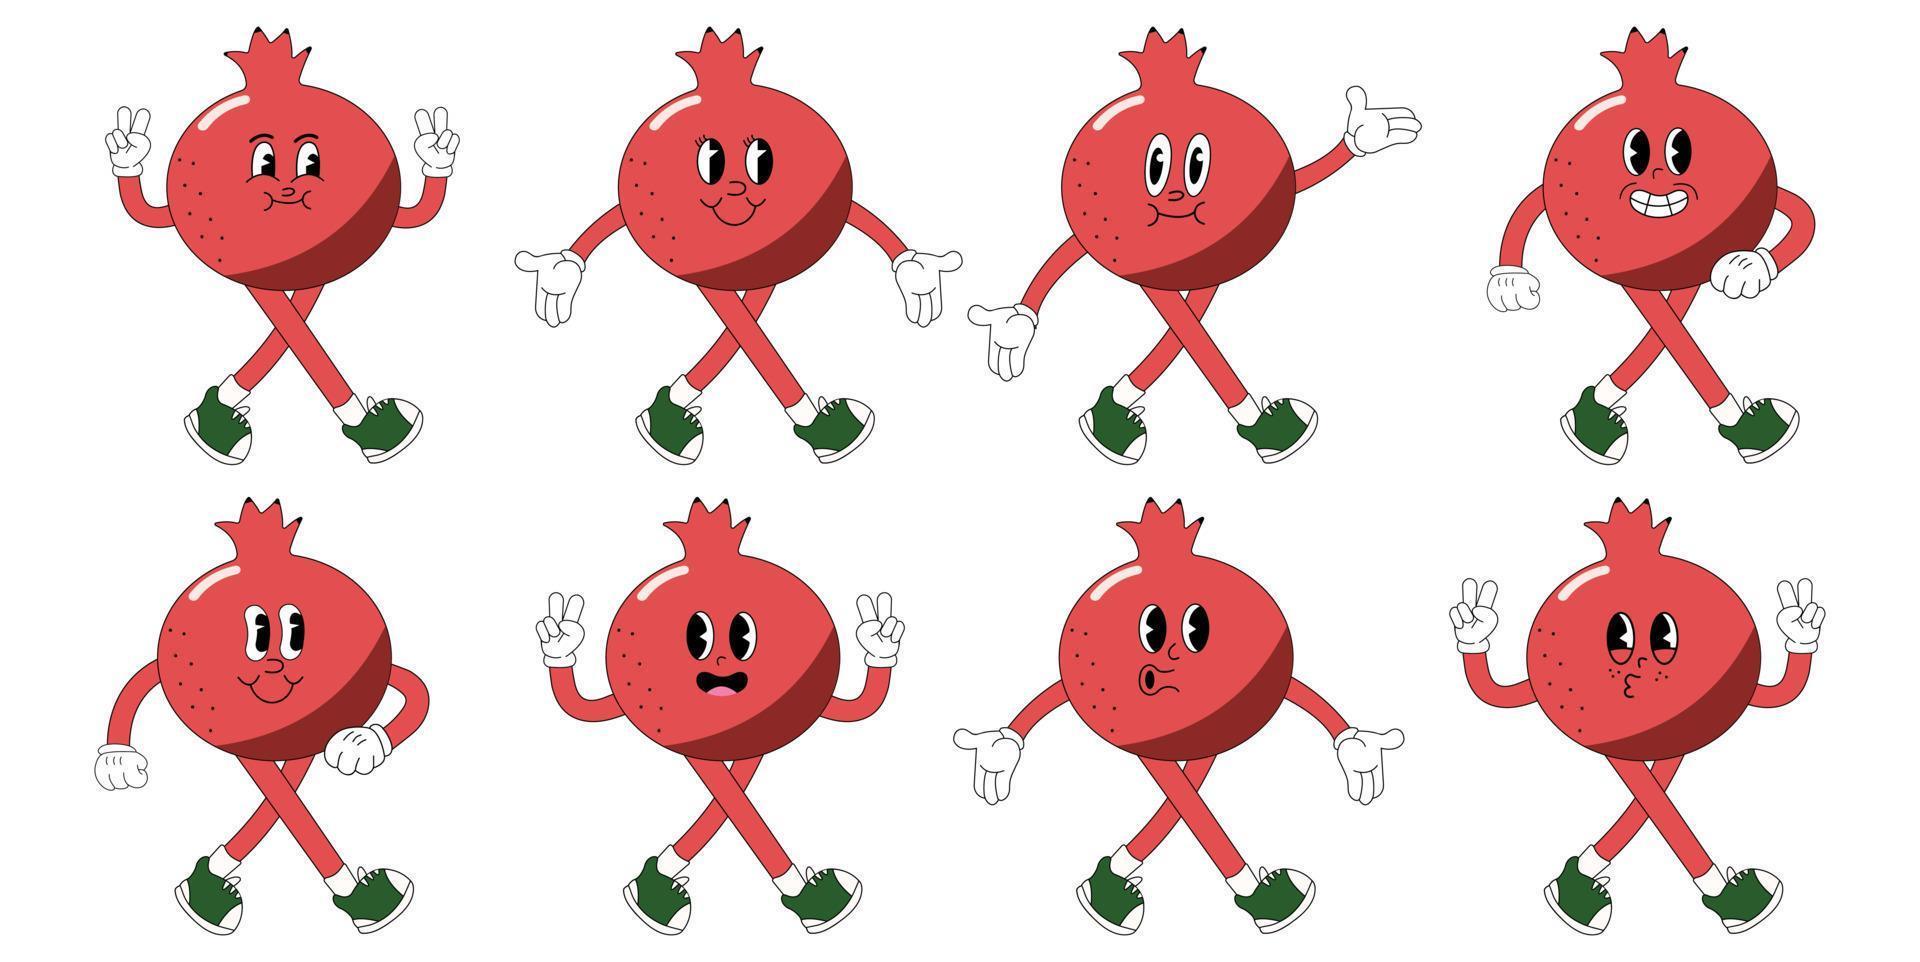 Garnet, pomegranate cartoon groovy stickers with funny comic characters, gloved hands. Modern illustration with legs and arms. vector